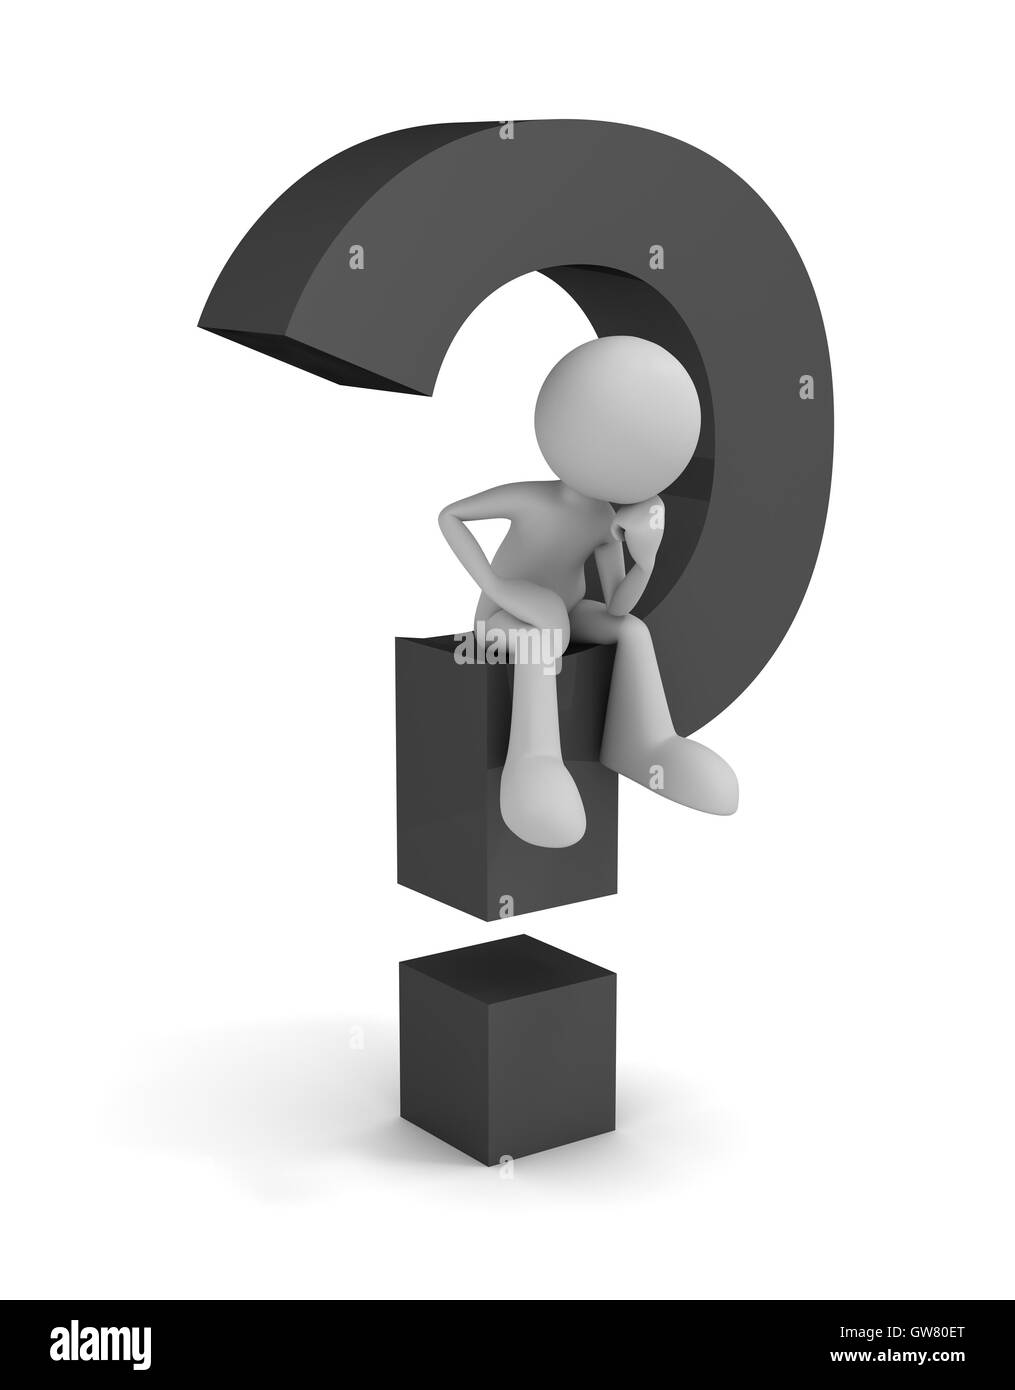 question mark and man concept  3d illustration Stock Photo